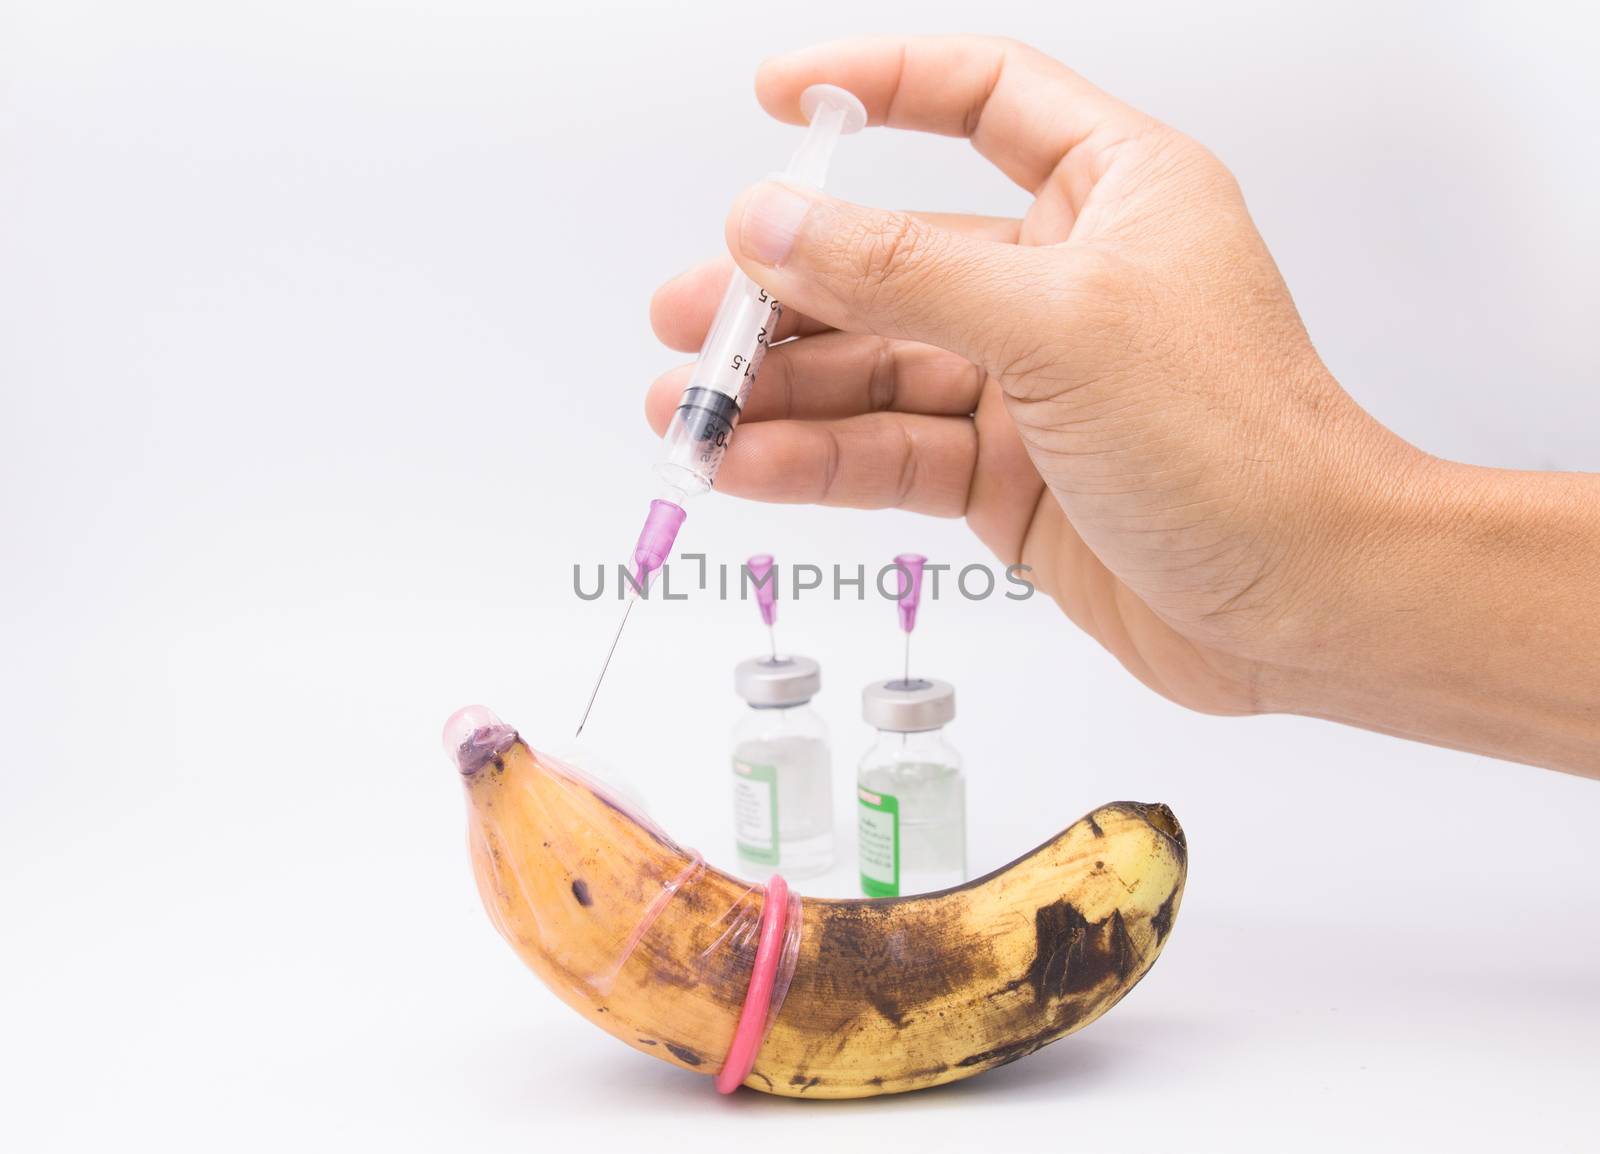 rotten banana in condom with hand injection,sexually transmitted disease concept